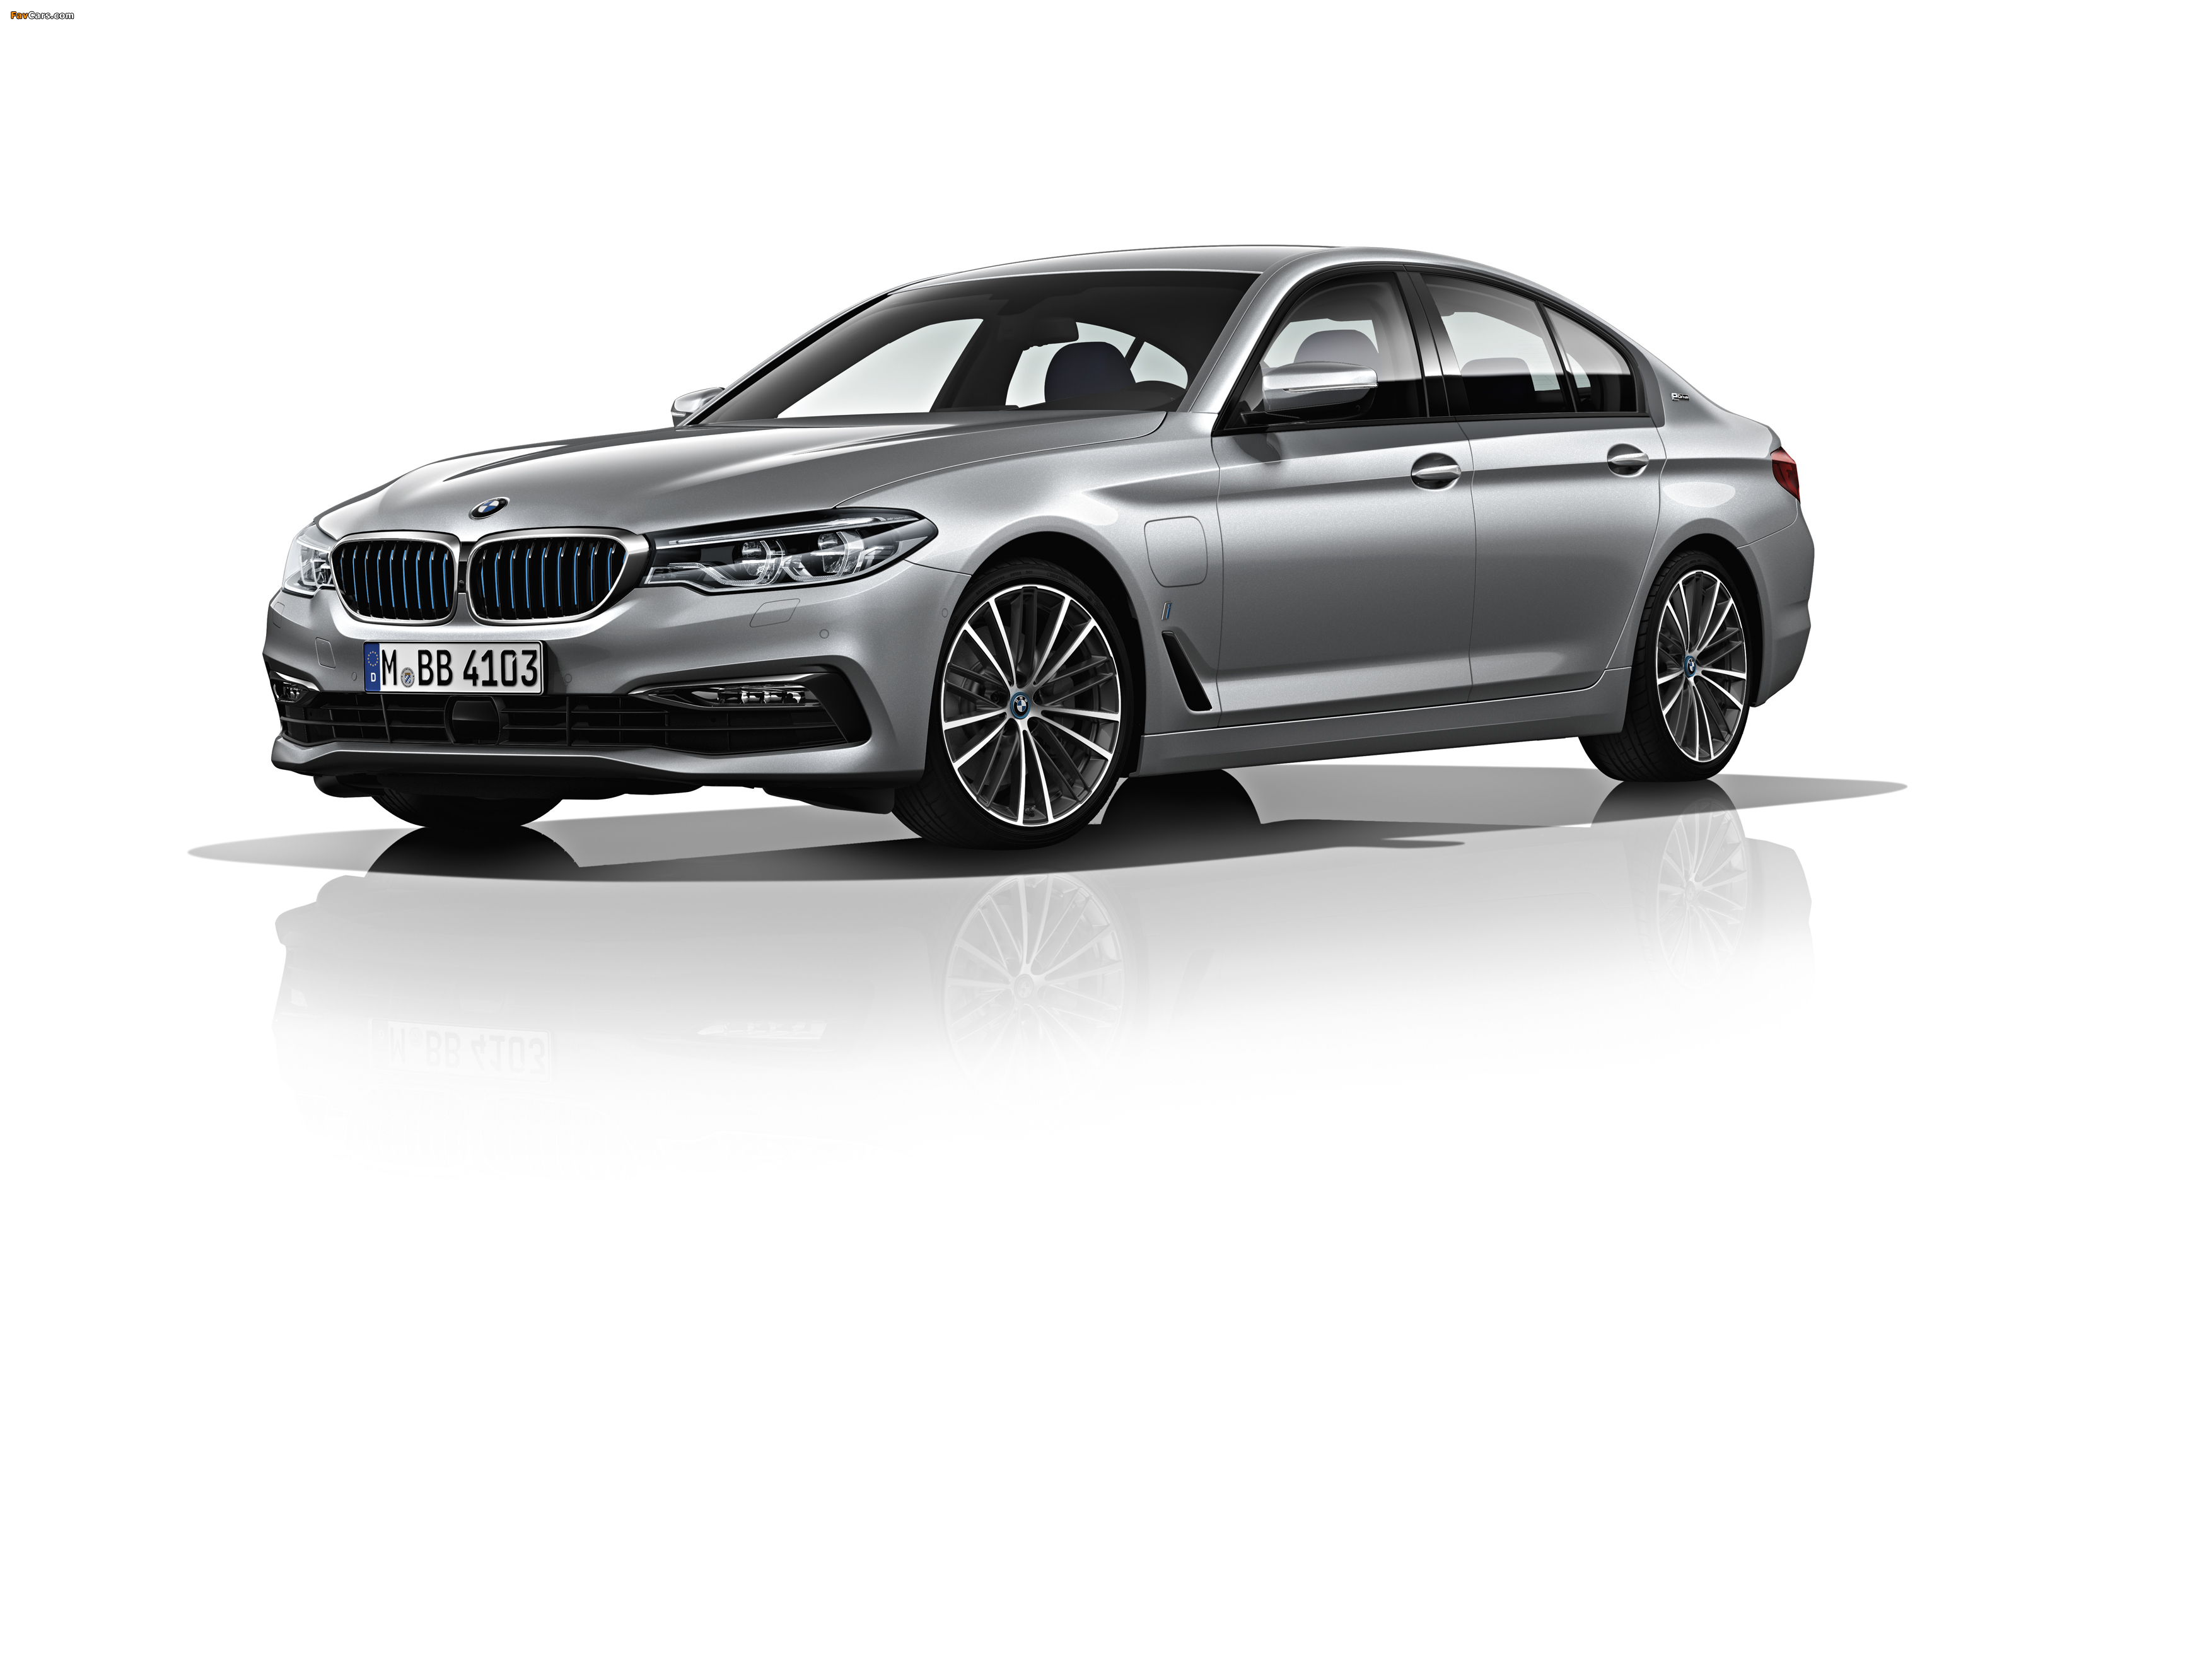 BMW 530e (G30) 2017 pictures (3508 x 2631)